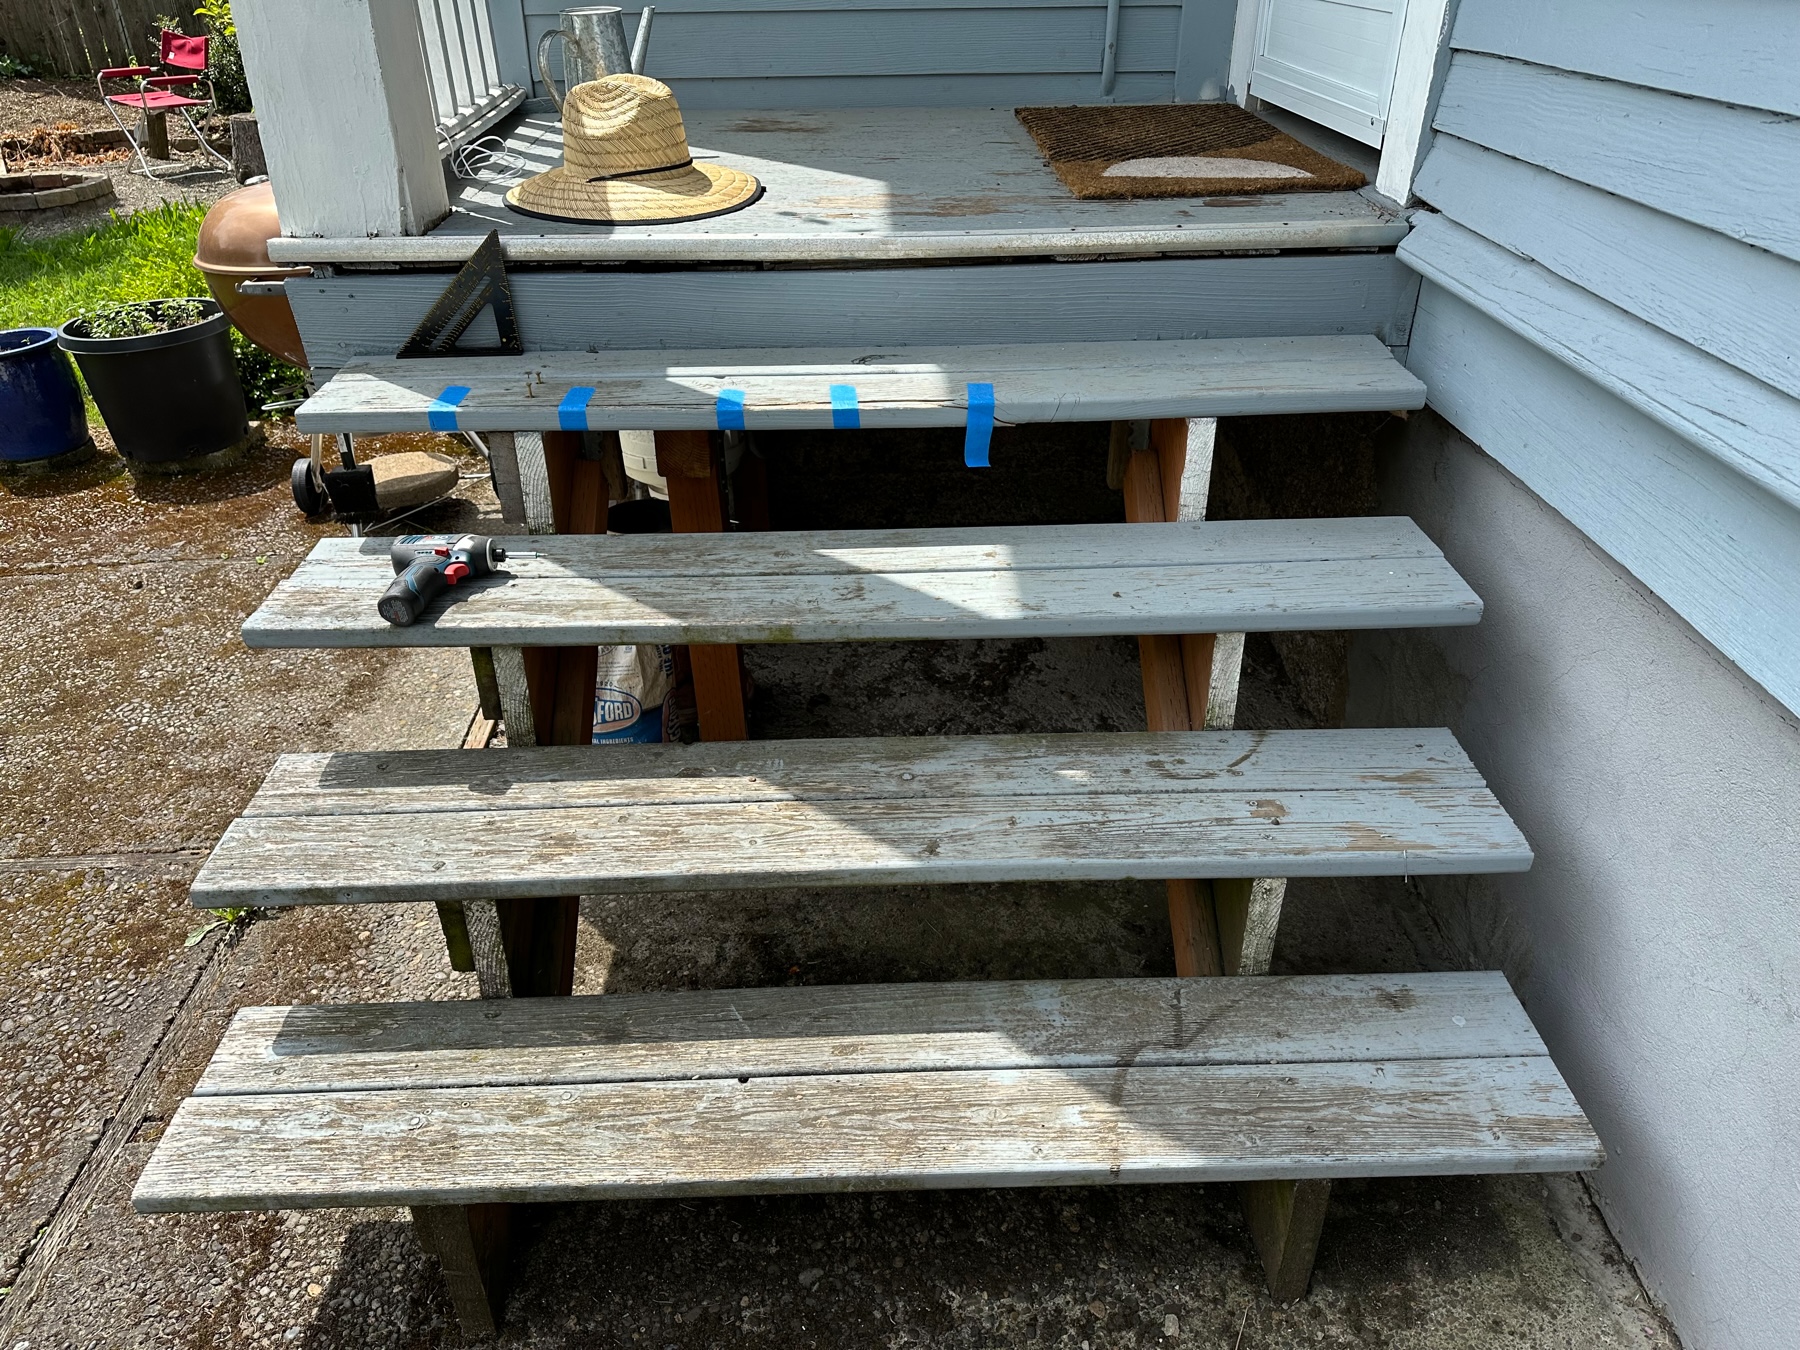 Front view of steps. There’s blue tape on a board on the top tread.